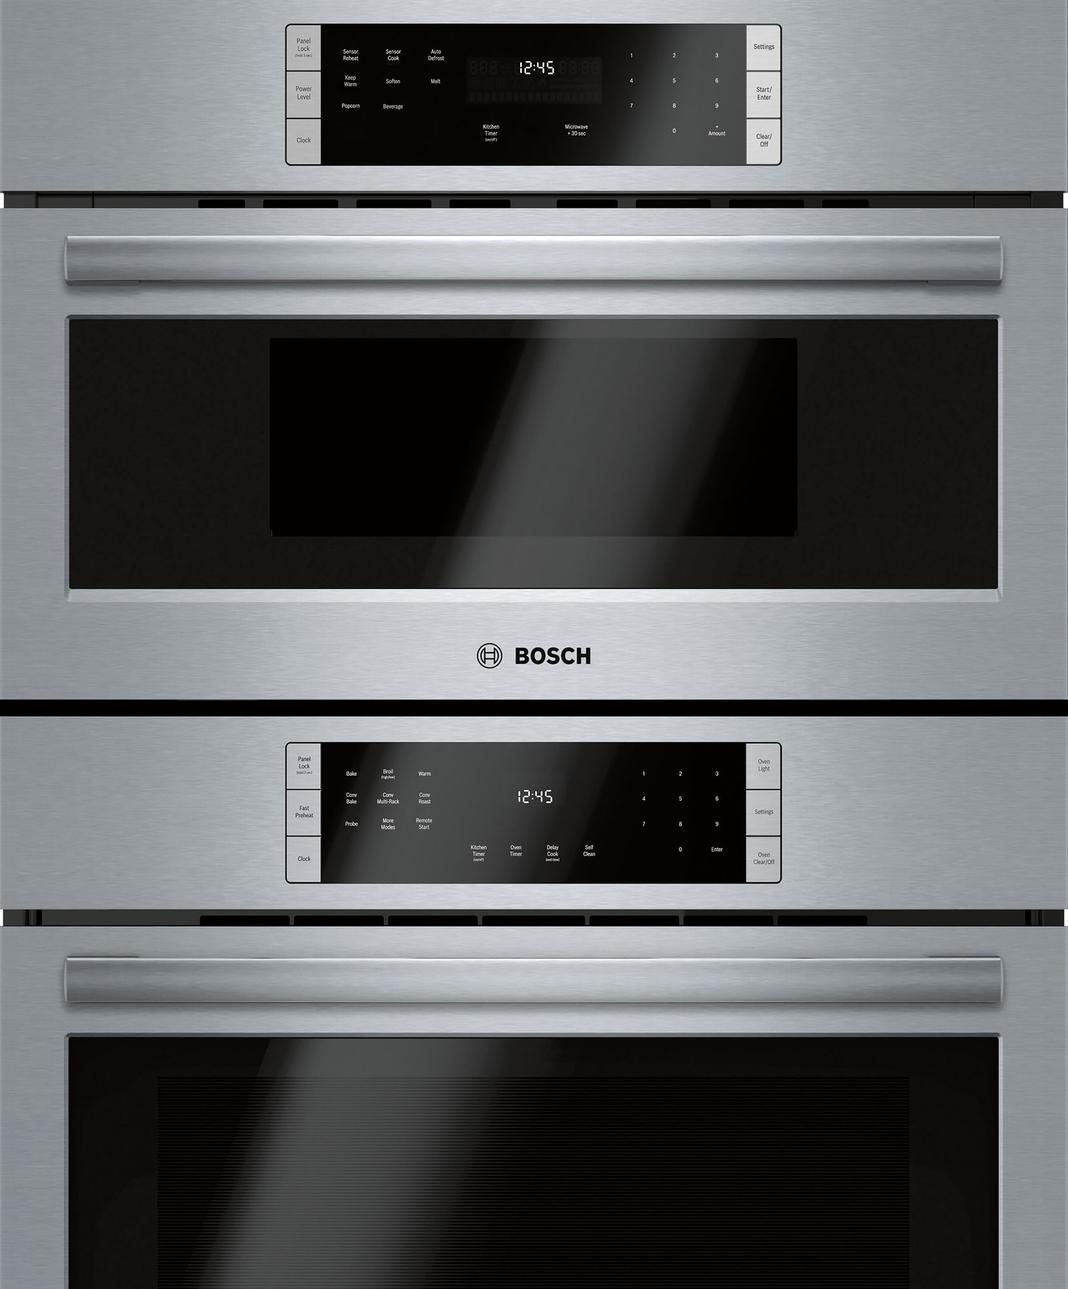 Bosch - 4.6 cu. ft Combination Wall Oven in Stainless Steel - HBL87M53UC